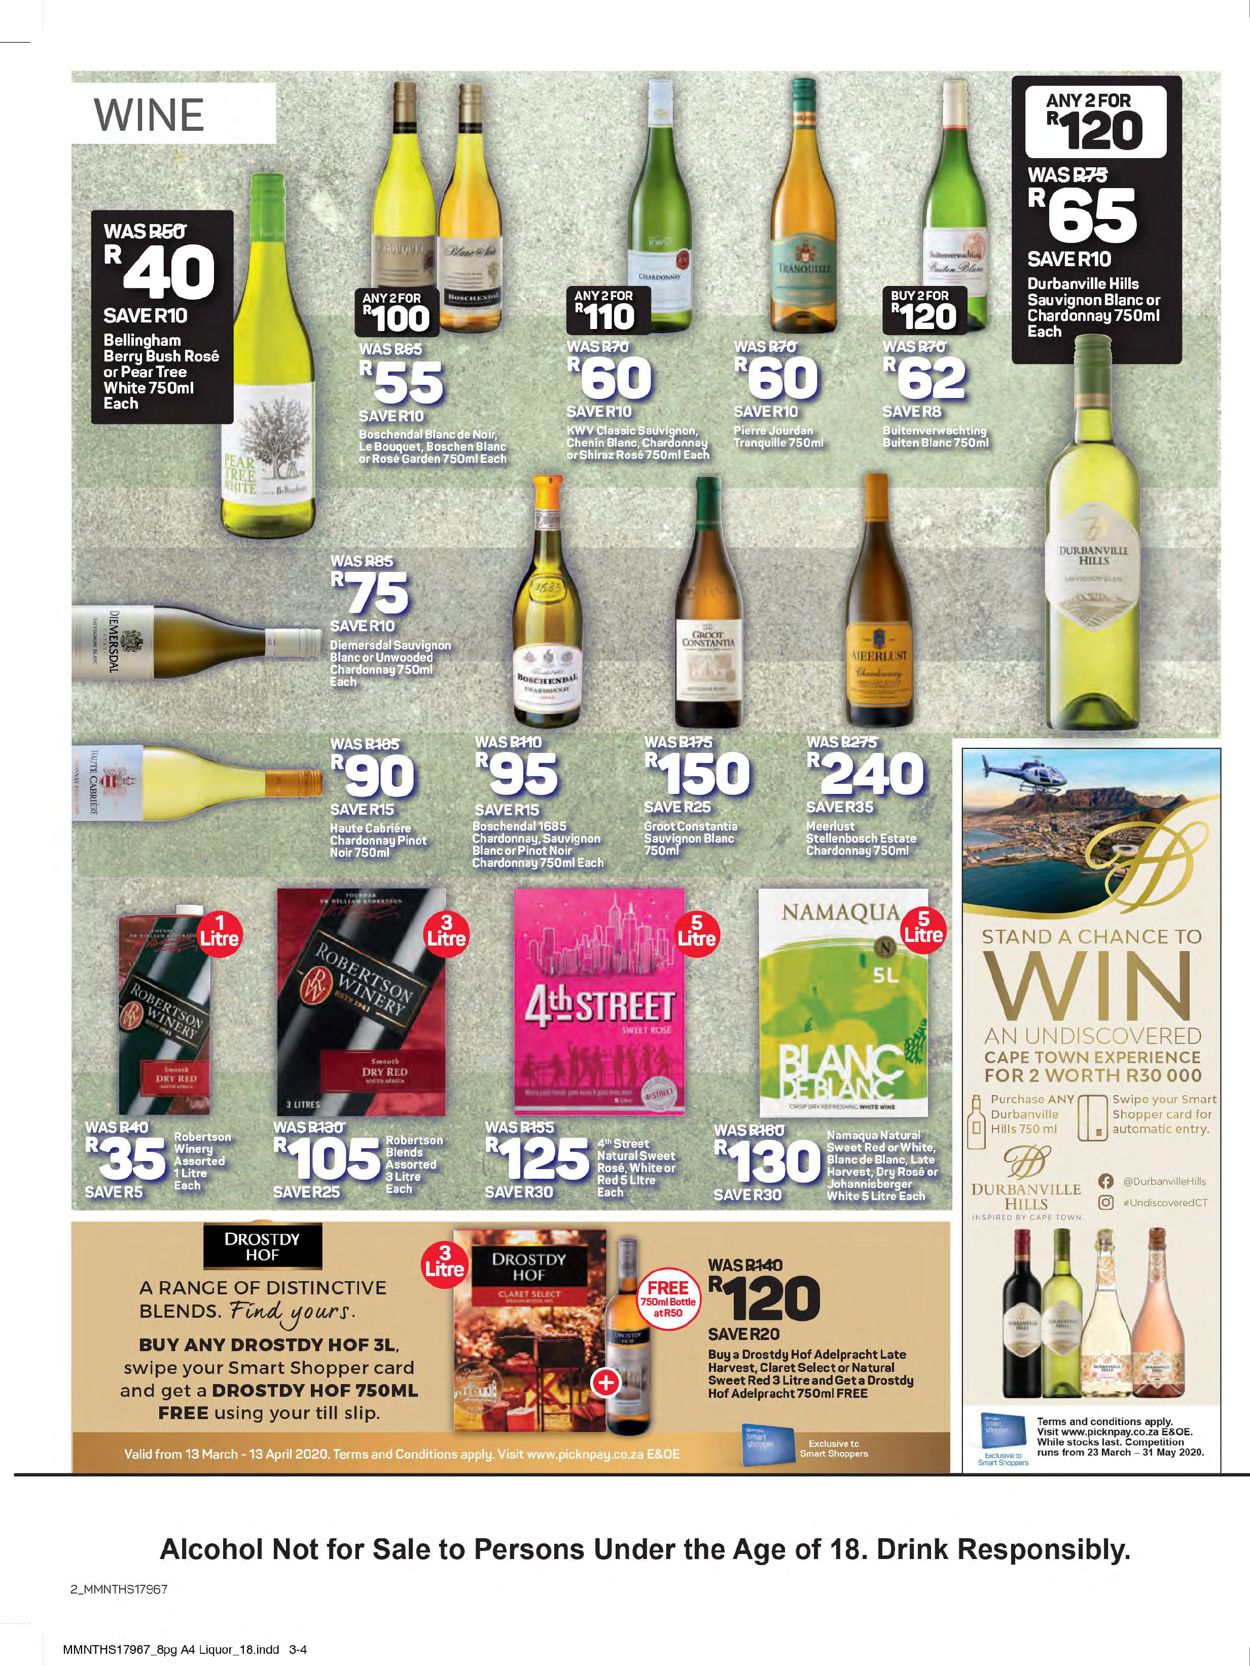 Pick n Pay Catalogue from 2020/03/23